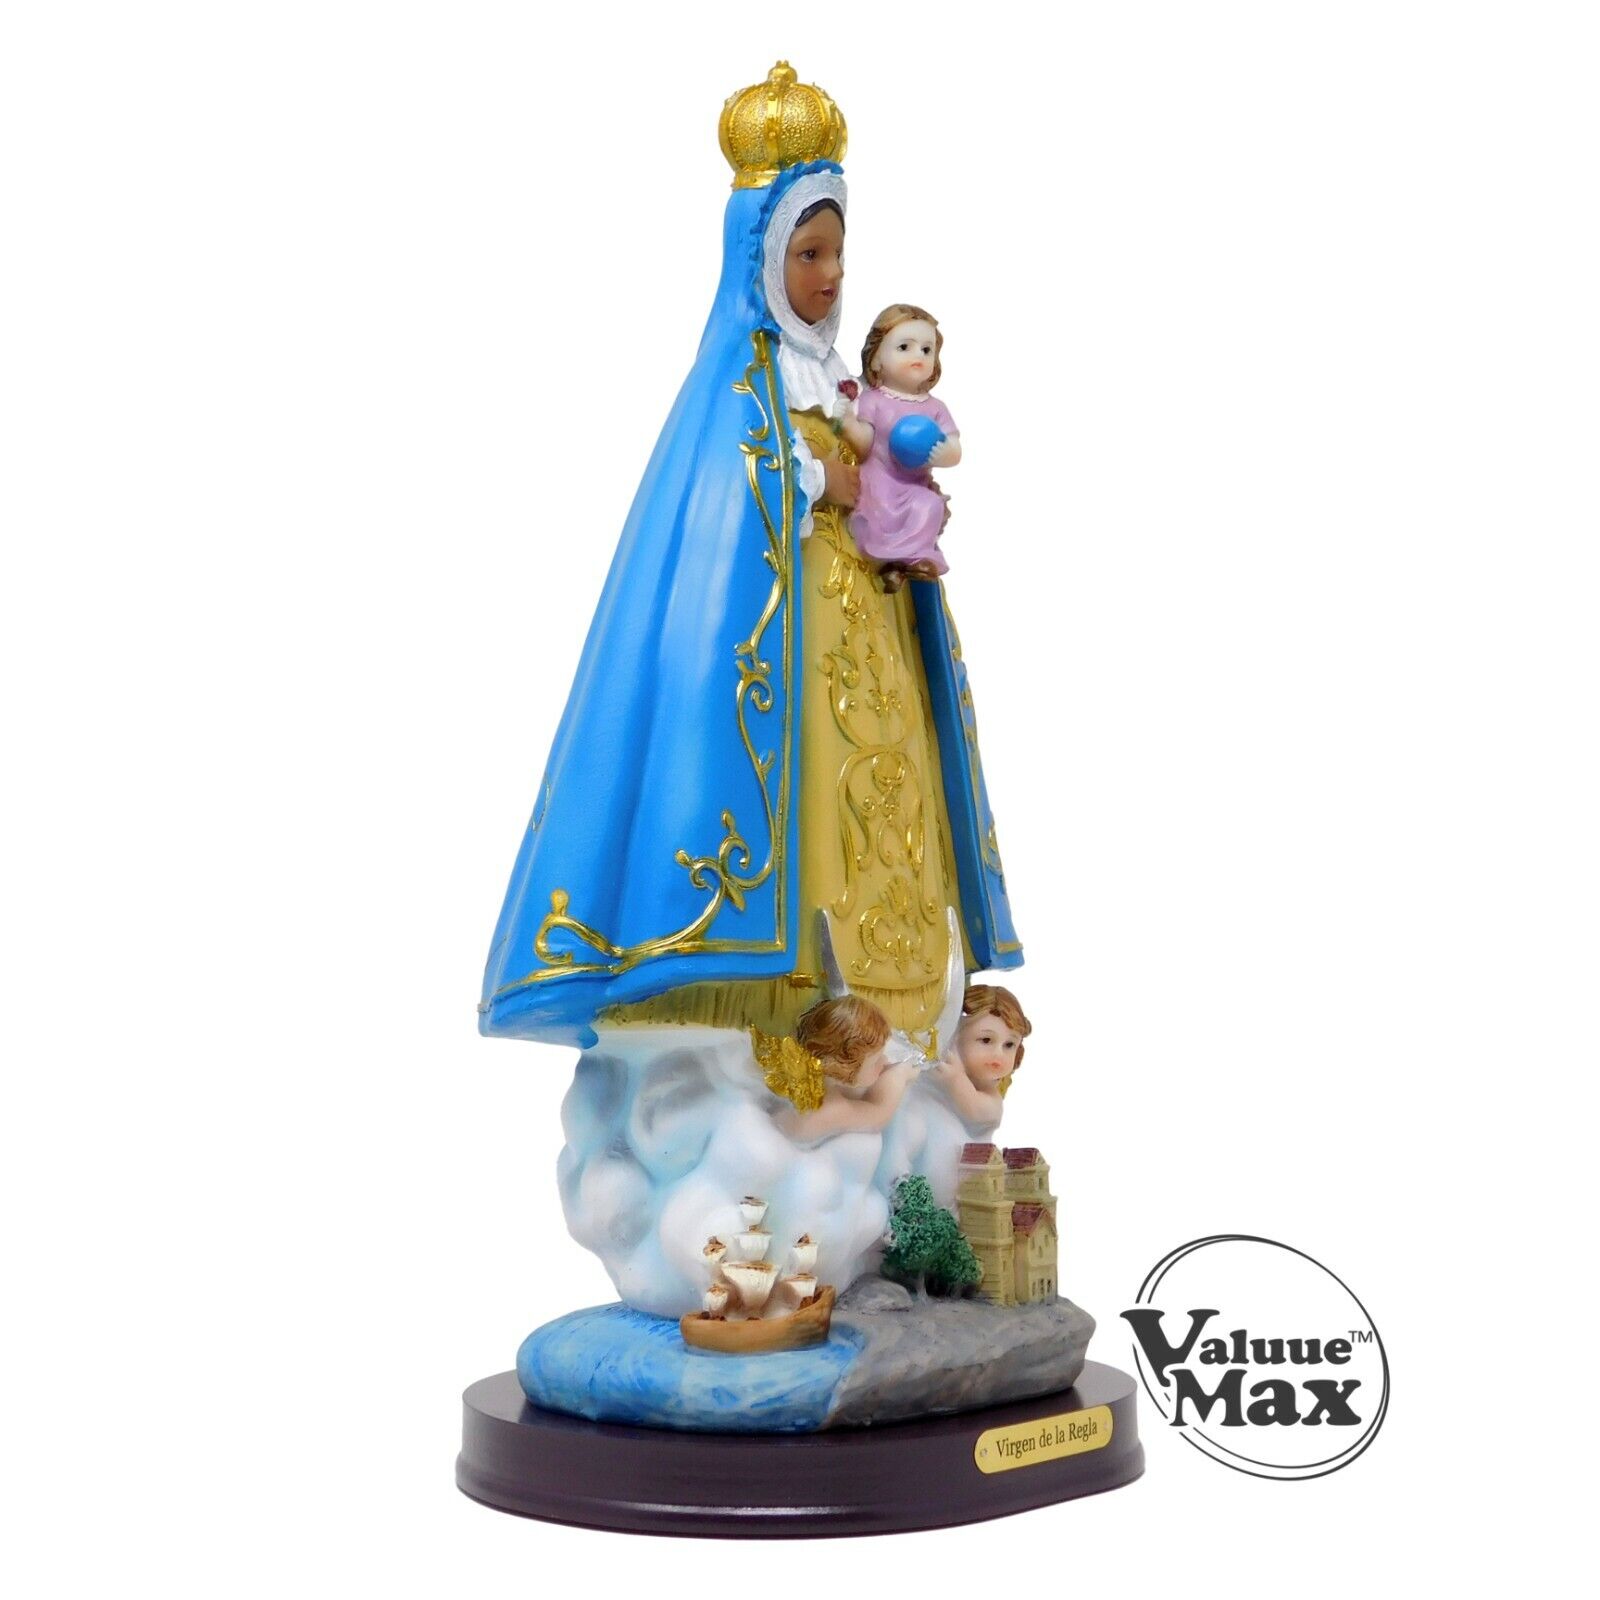 ValuueMax™ Our Lady of Regla Statue, Finely Detailed Resin 12 Inch Tall Figurine